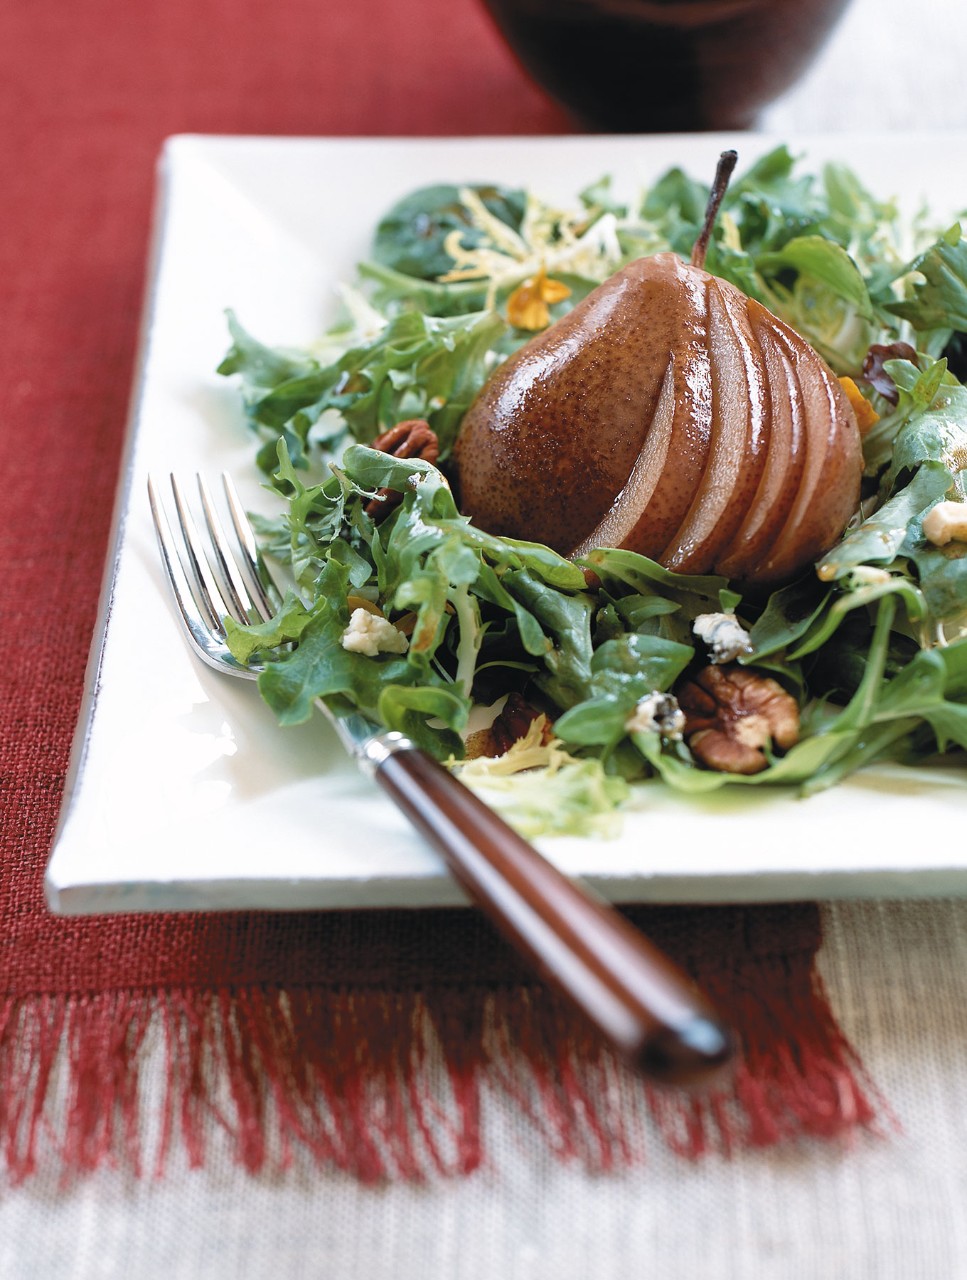 Roasted Sugar Pears with Greens and Roquefort